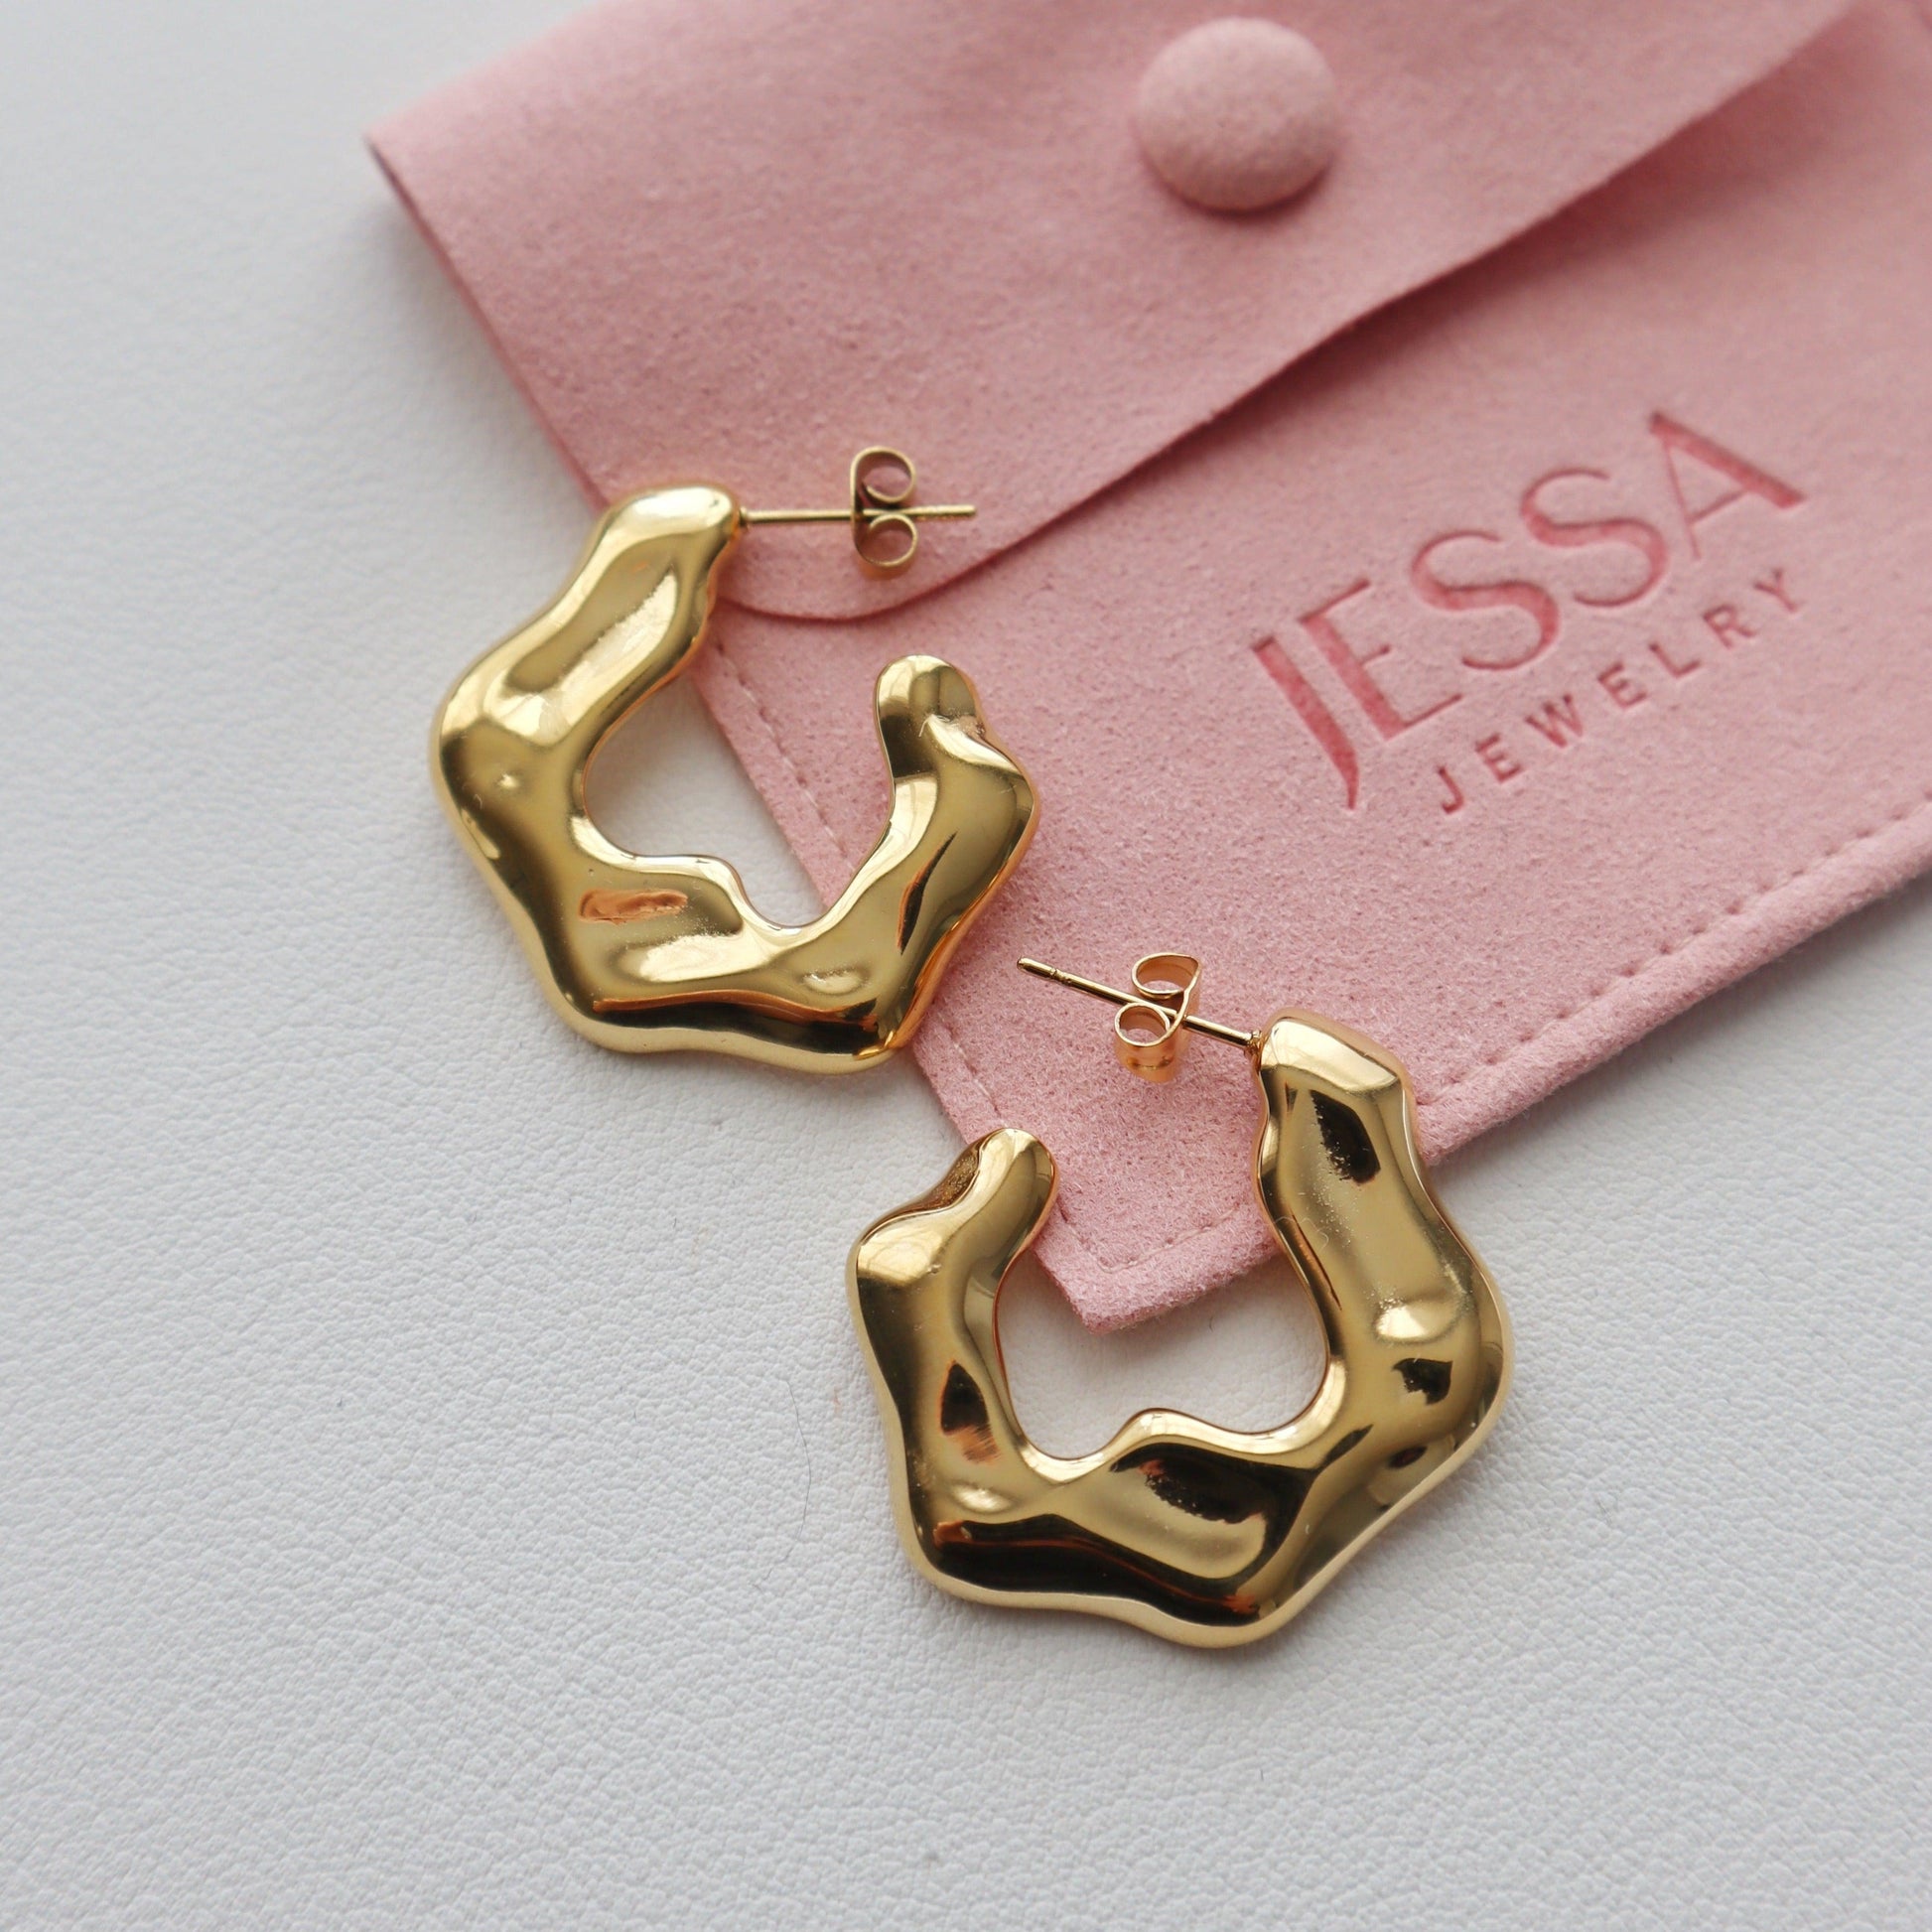 River Hoops | Statement Gold Hoops - JESSA JEWELRY | GOLD JEWELRY; dainty, affordable gold everyday jewelry. Tarnish free, water-resistant, hypoallergenic. Jewelry for everyday wear